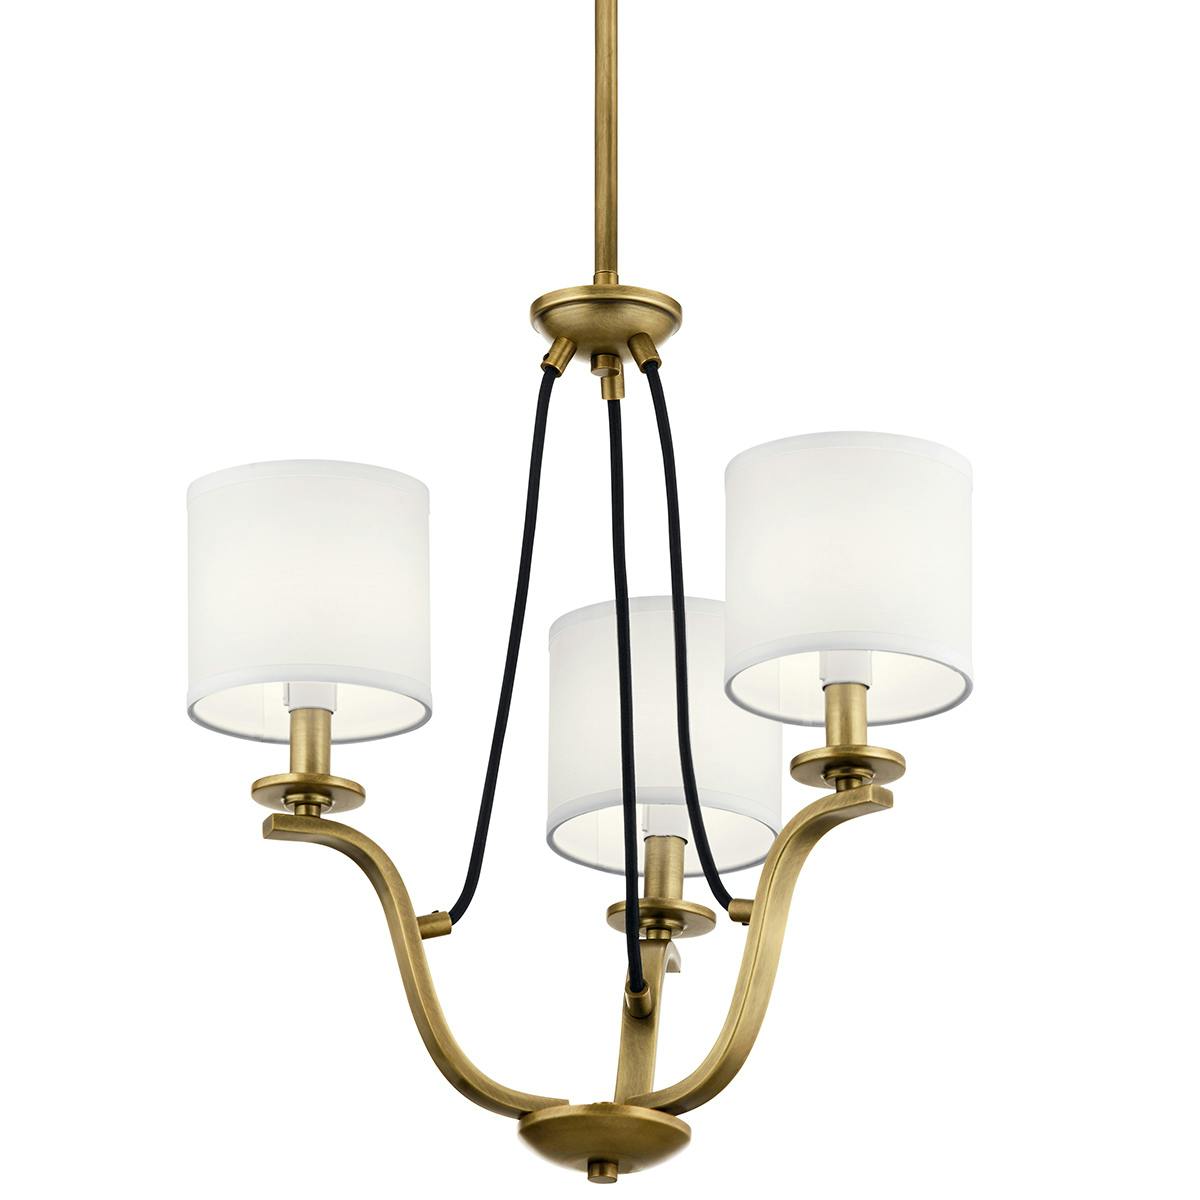 Close up view of the Thisbe 18" 3 Light Mini Chandelier Brass on a white background